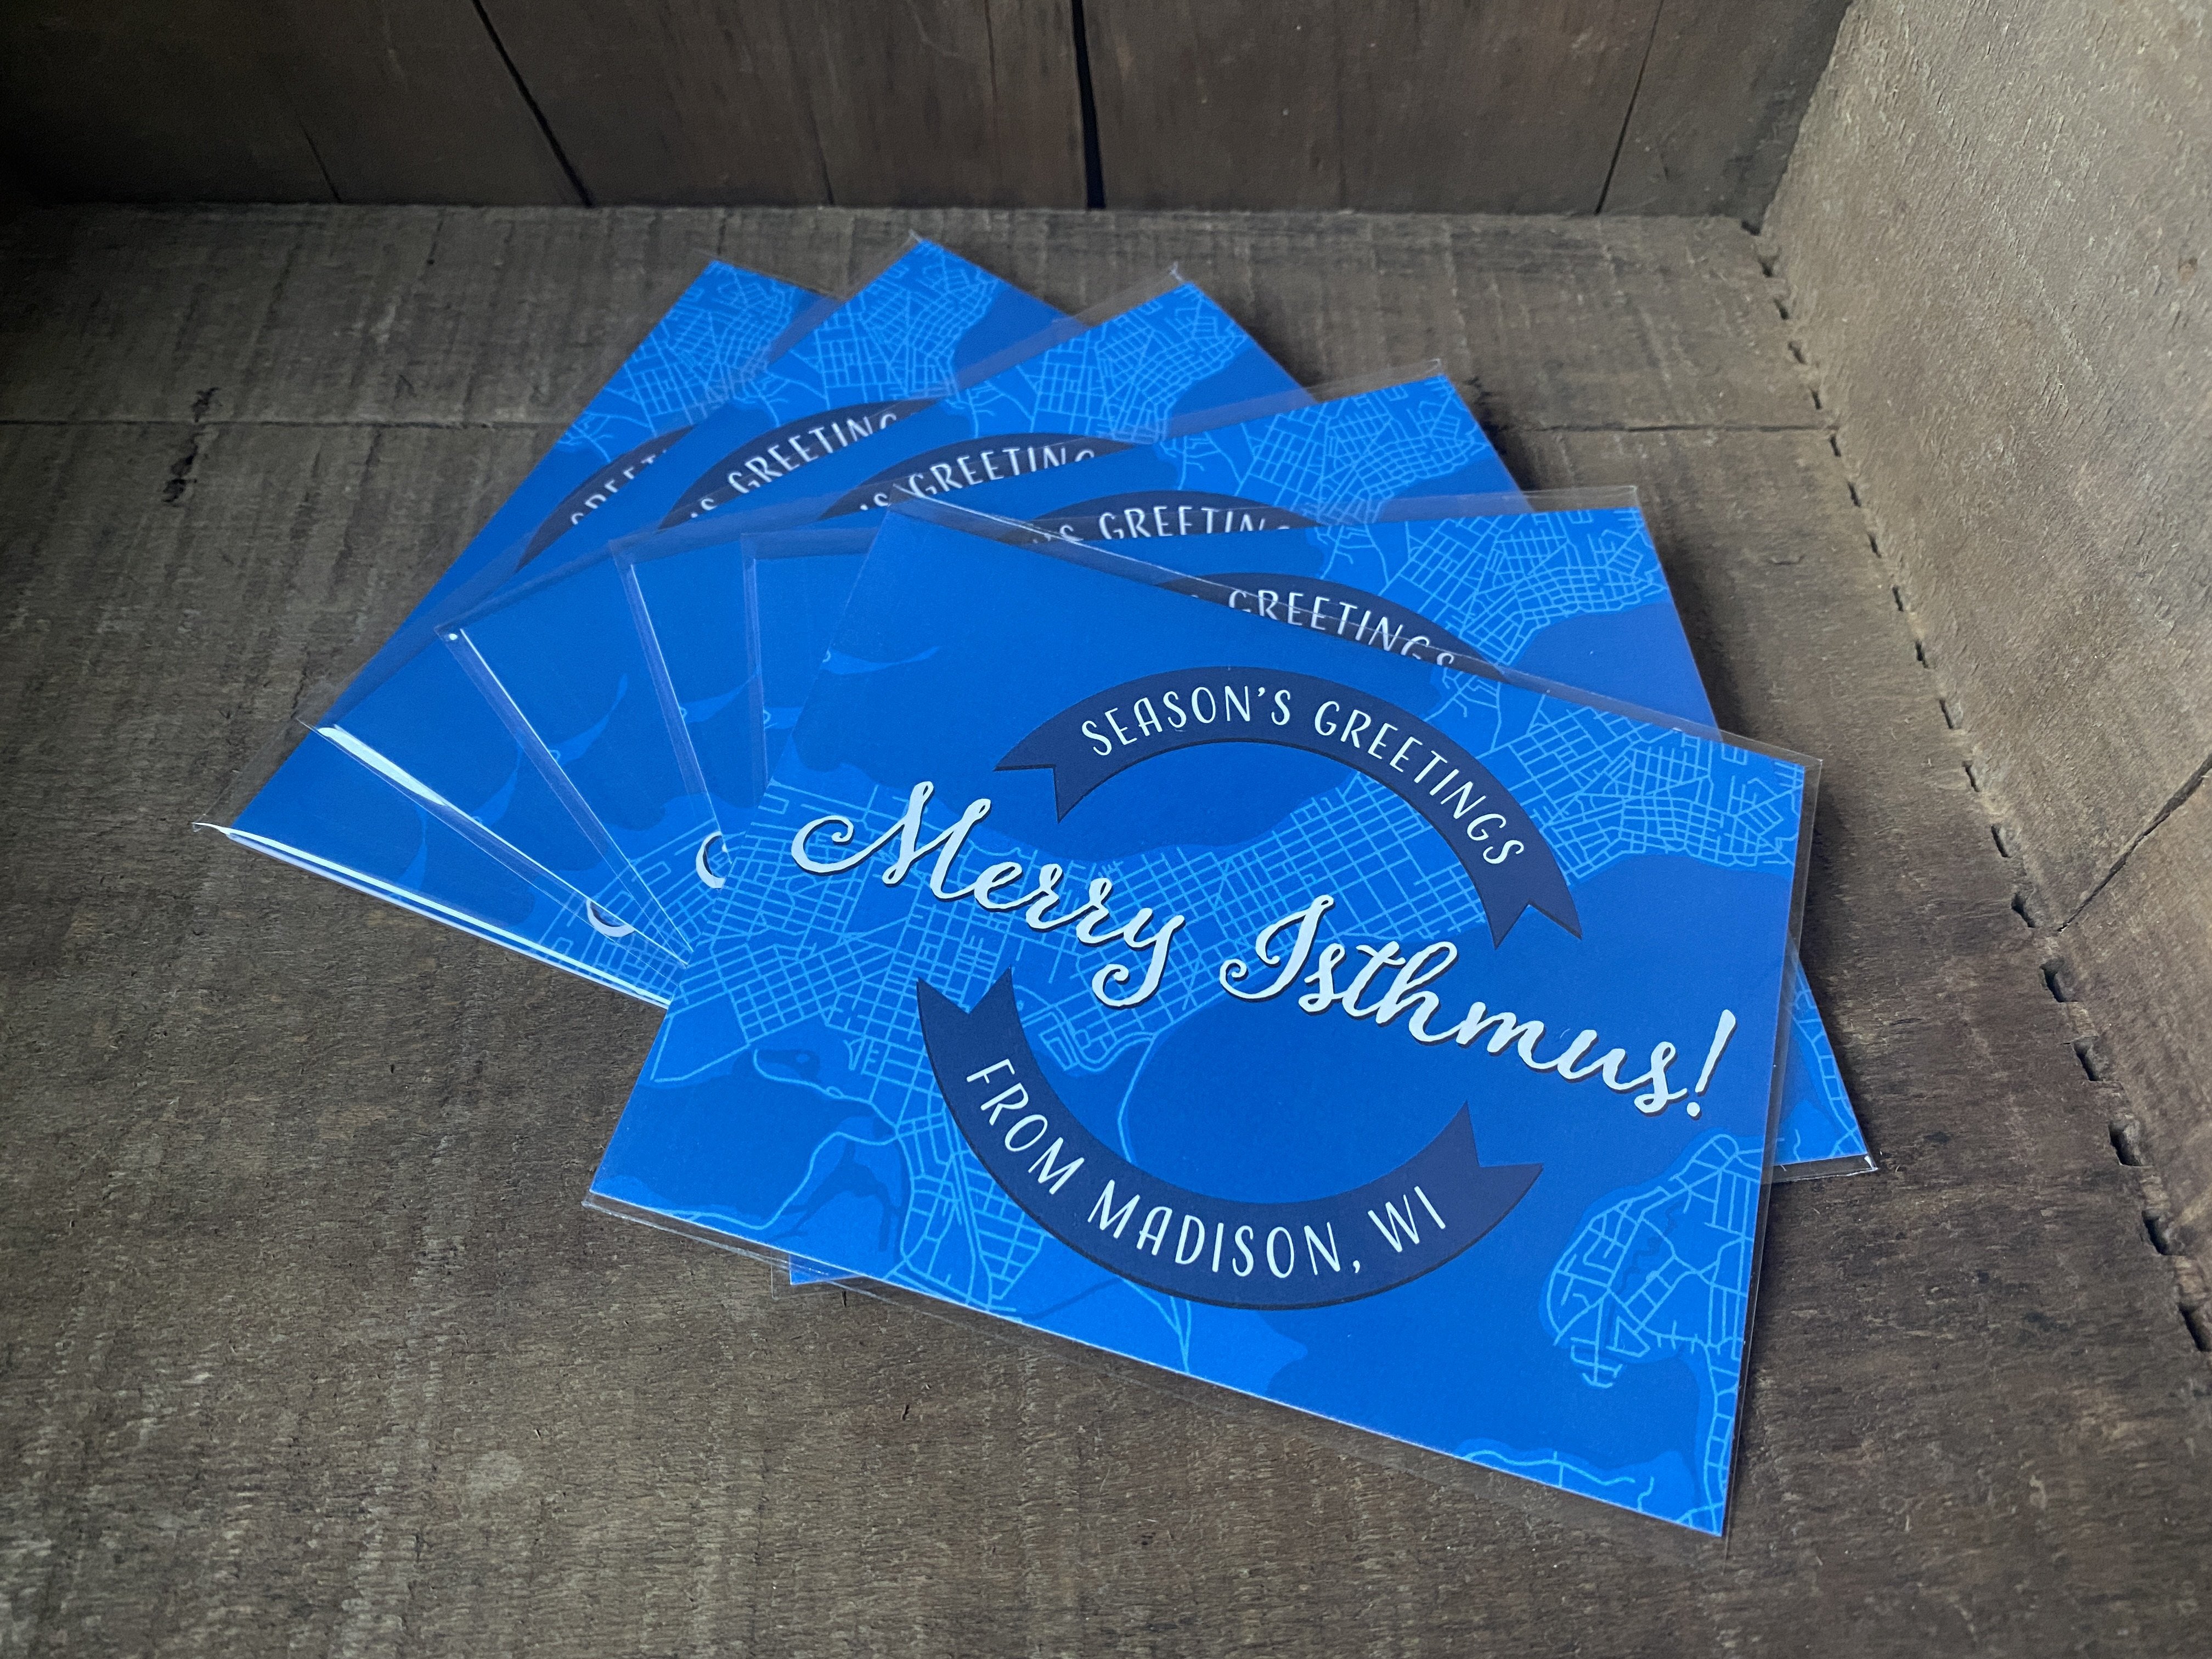 Set of 6 Merry Isthmus! Cards